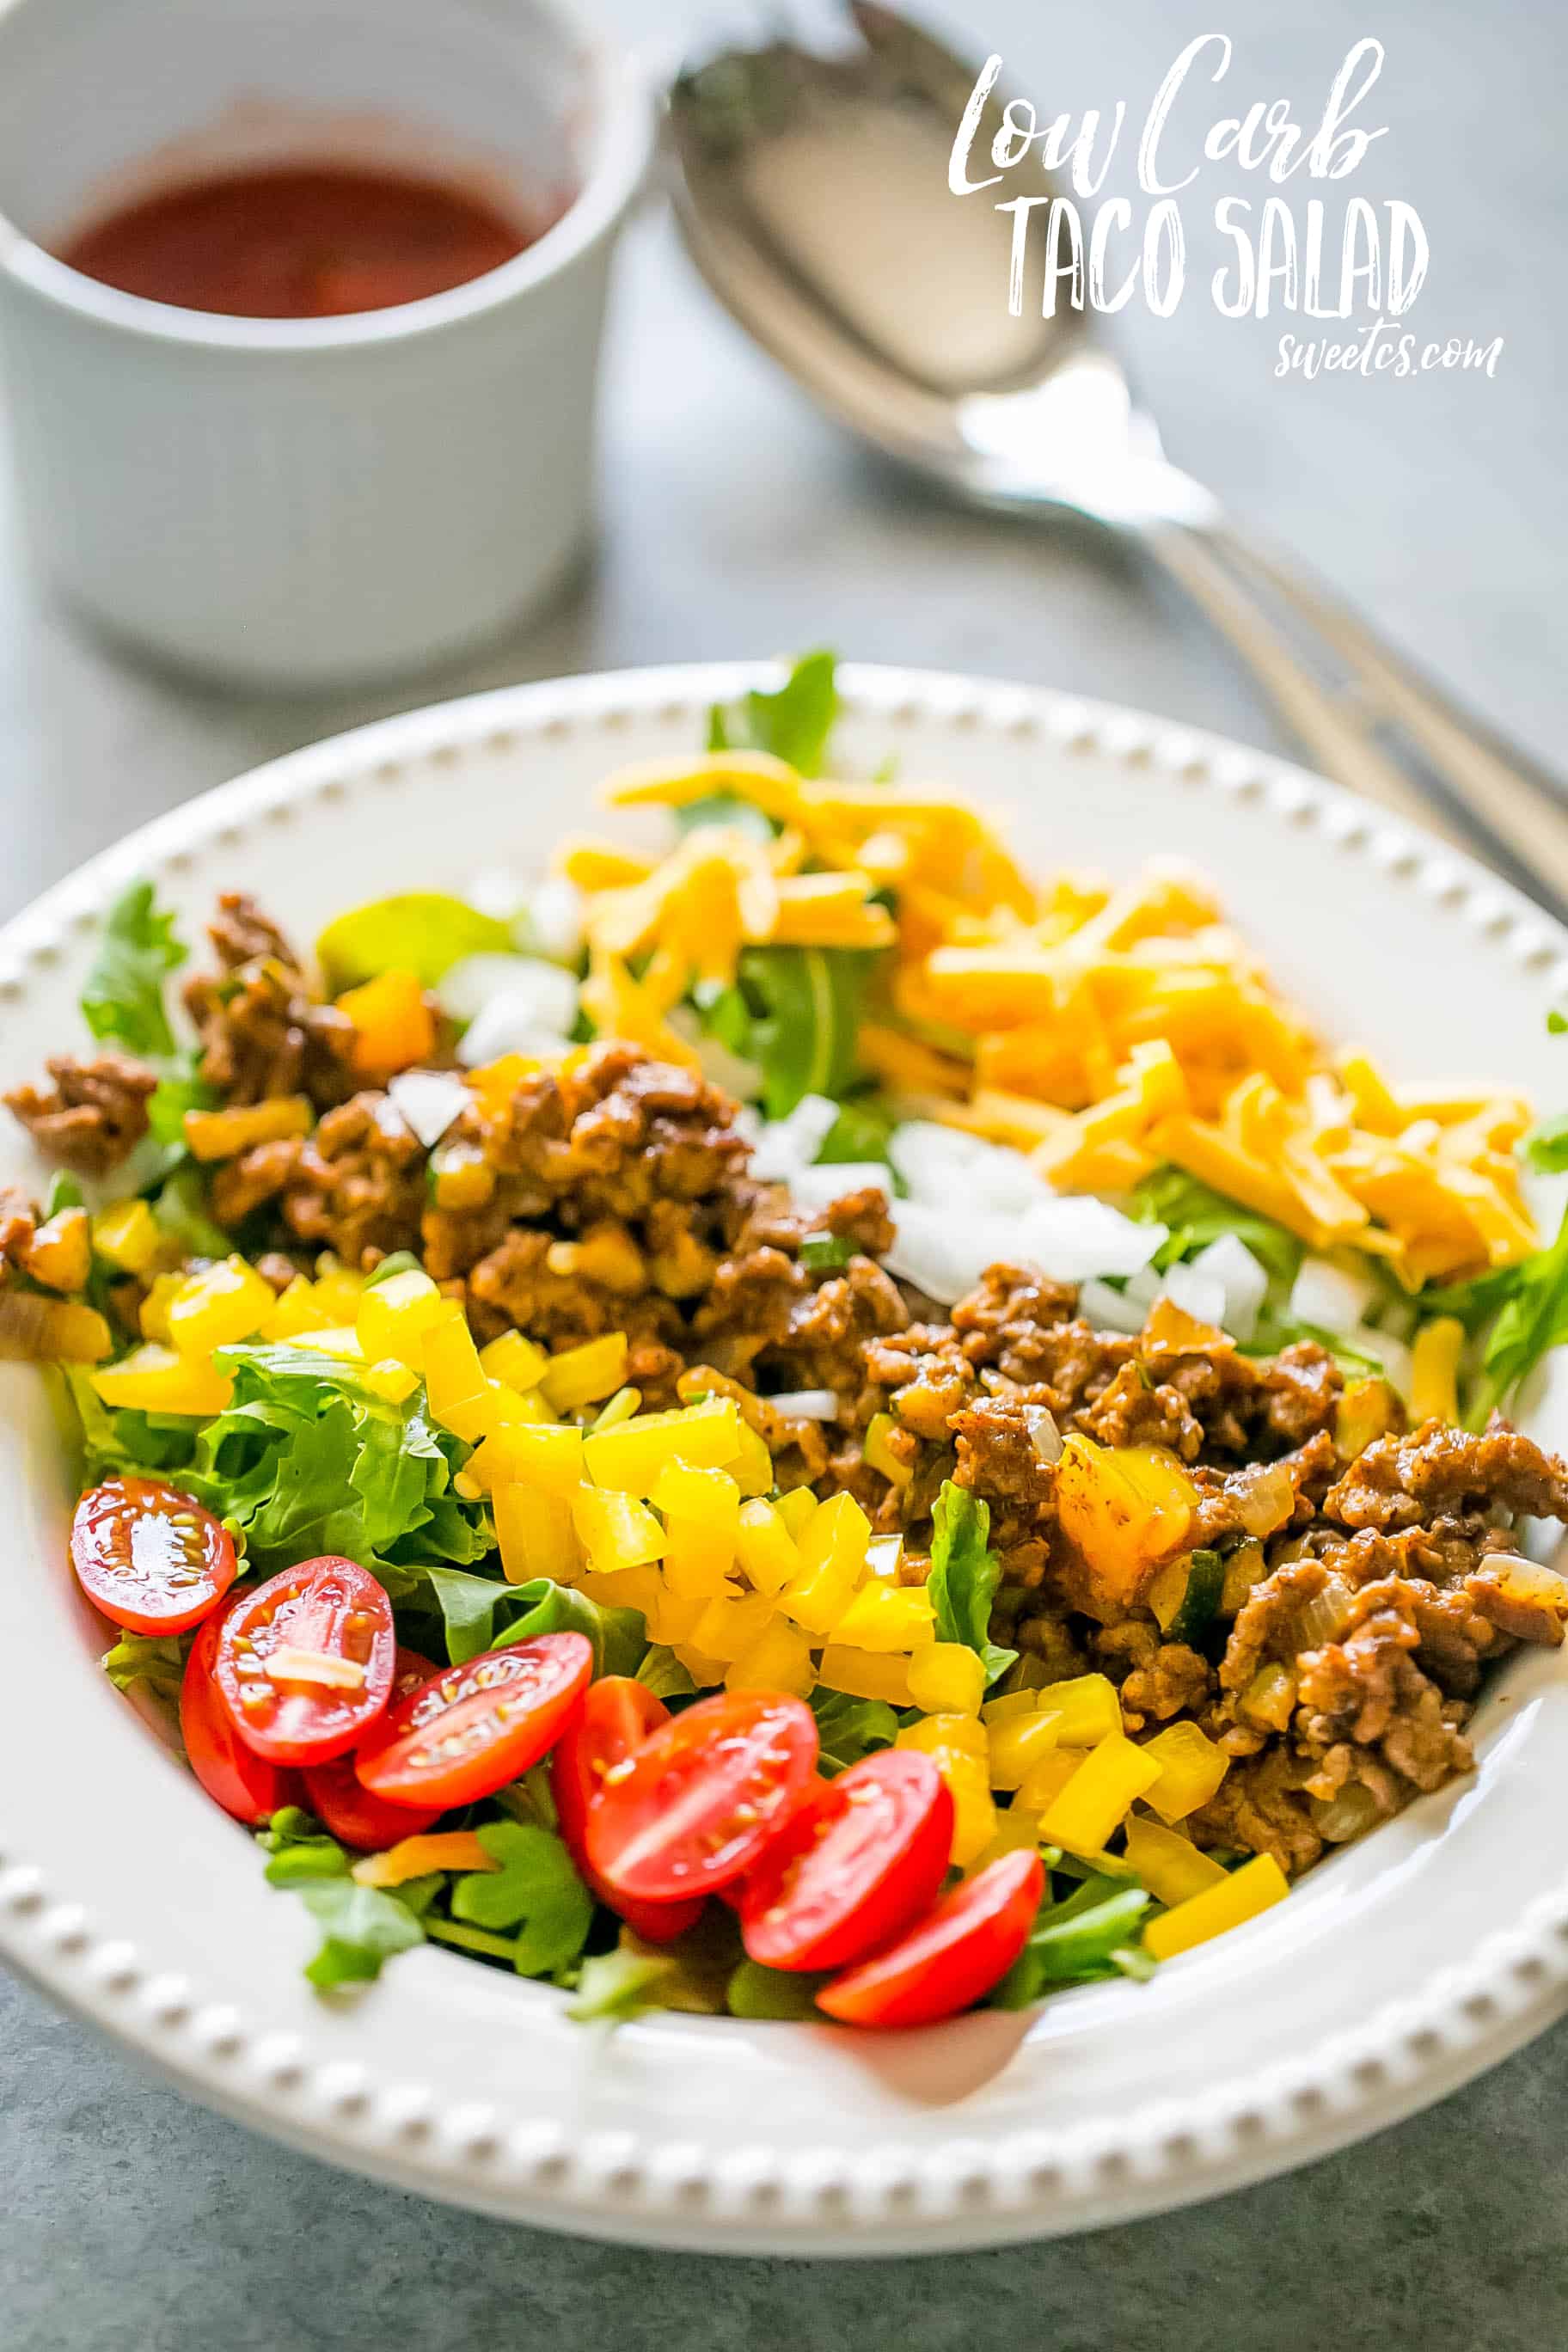 This low carb taco salad is light, refreshing, full of flavor, and SO easy!